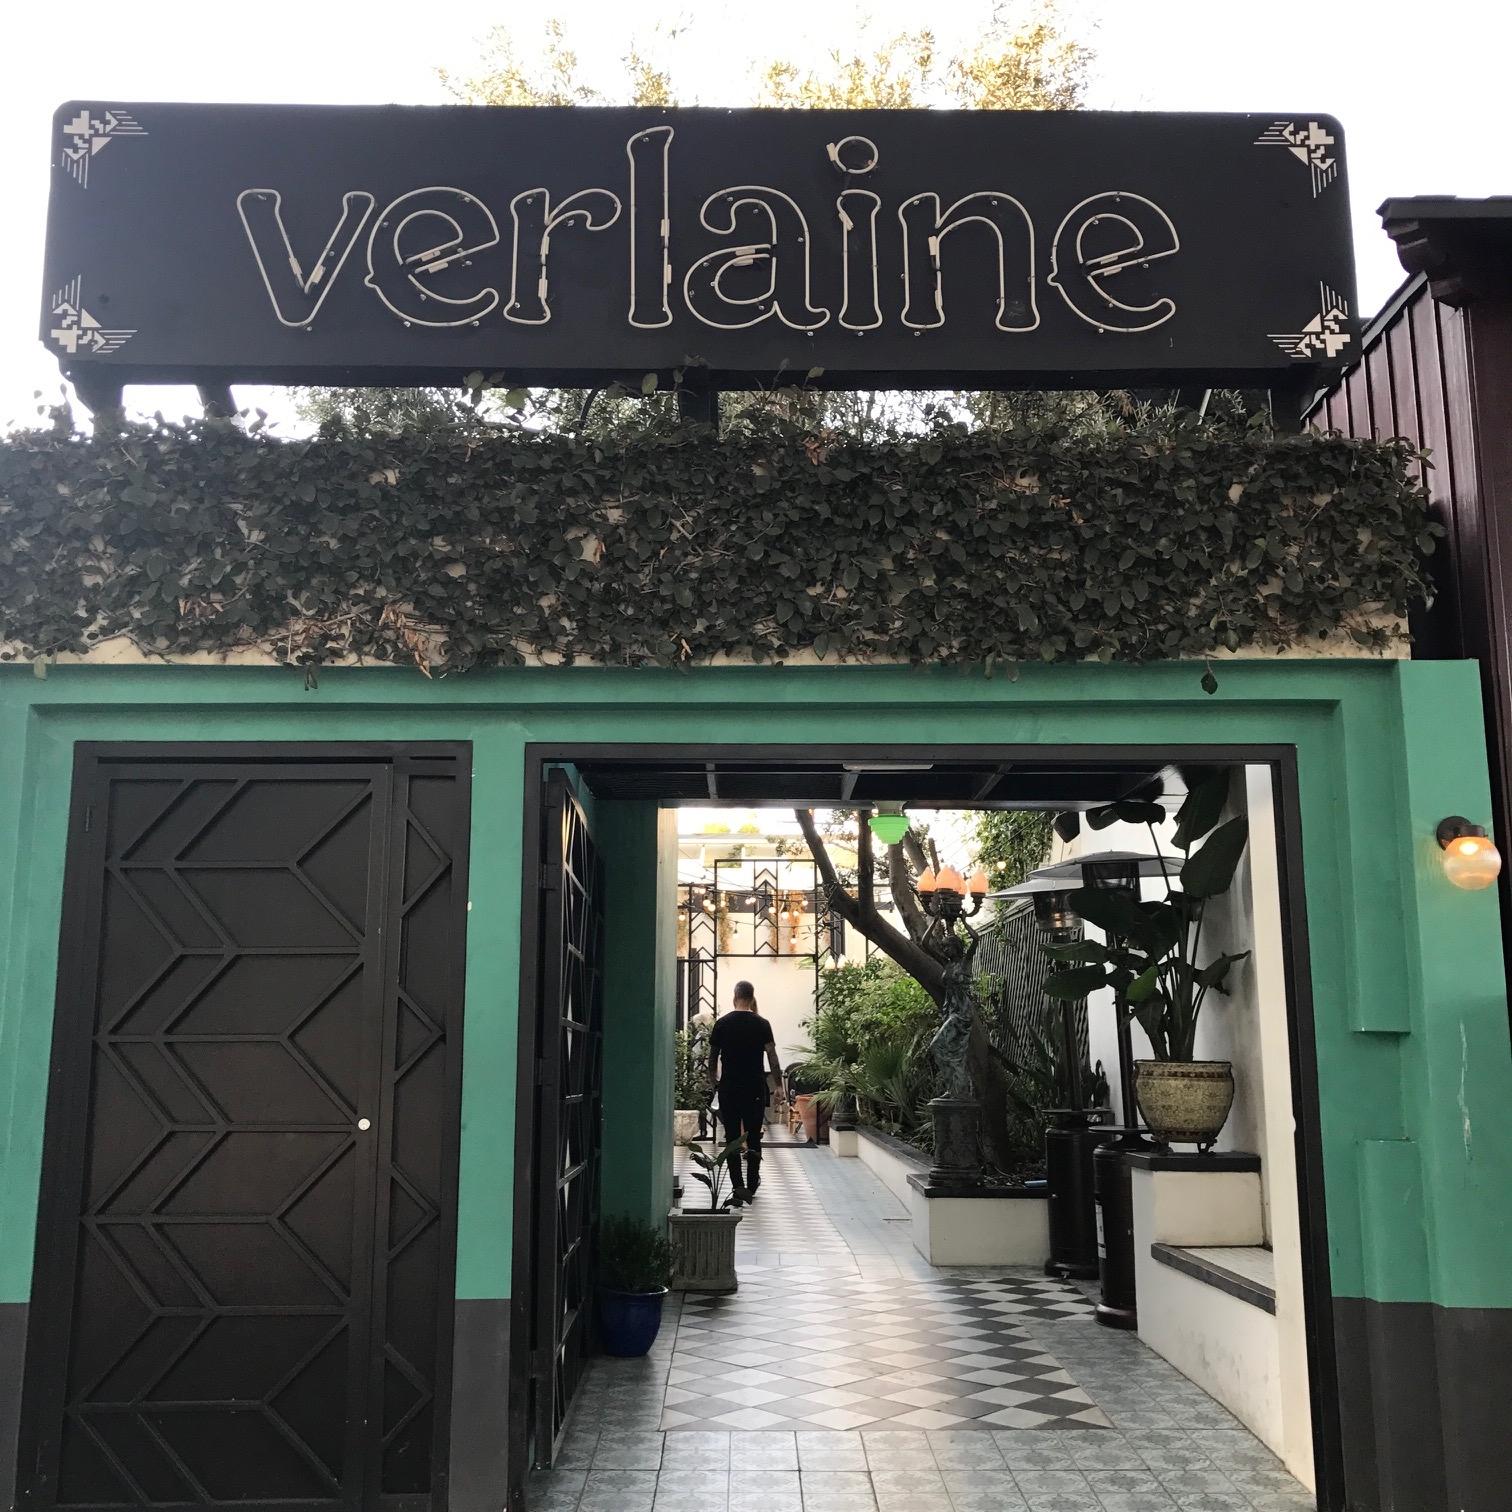 Verlaine, You Had Me and My Stomach At Hello…